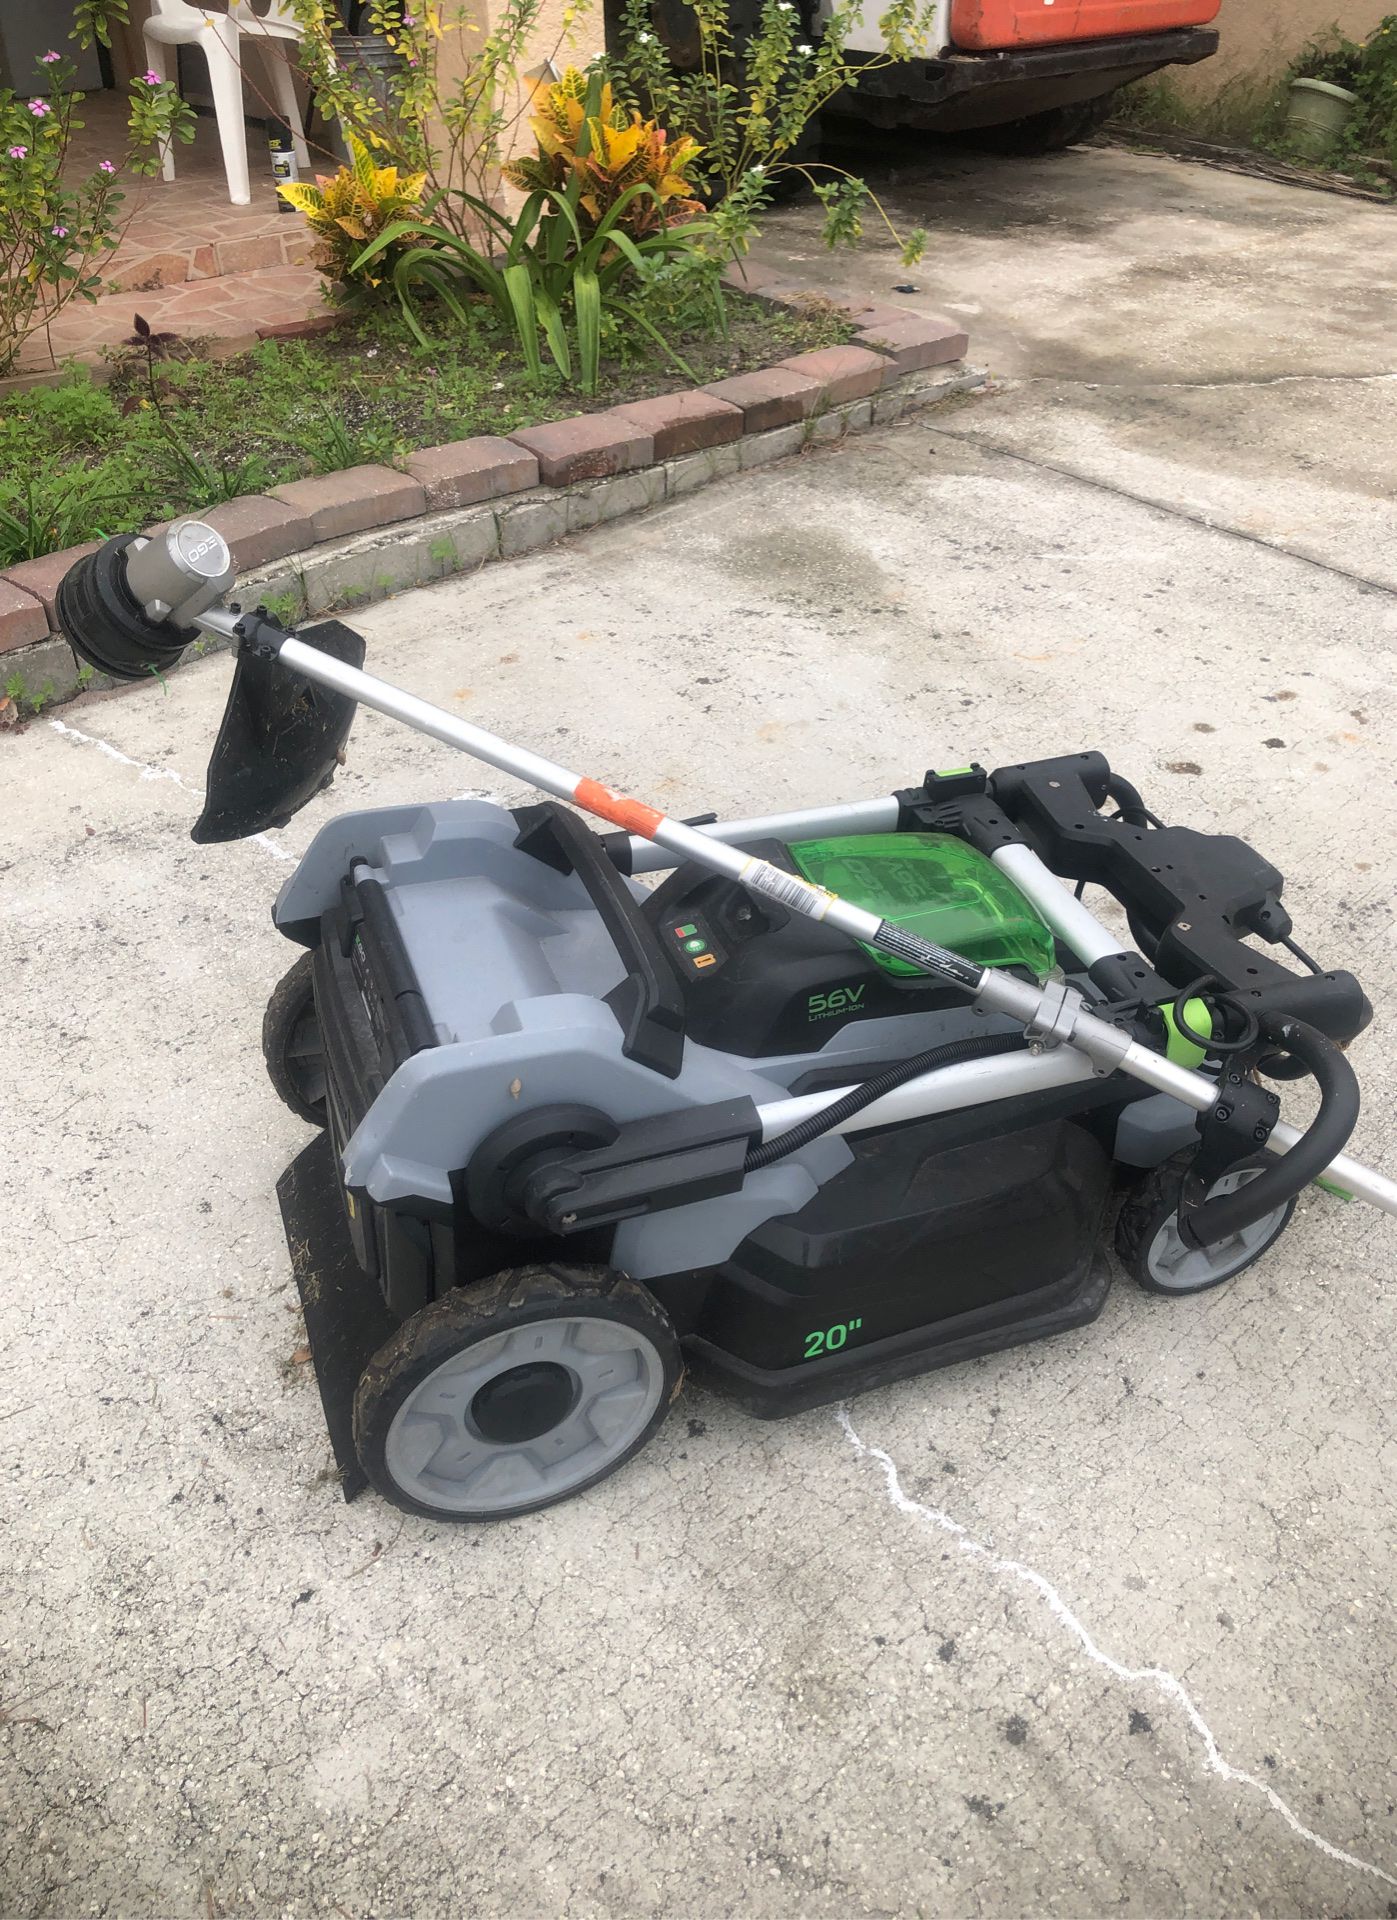 Lawnmower-battery operated